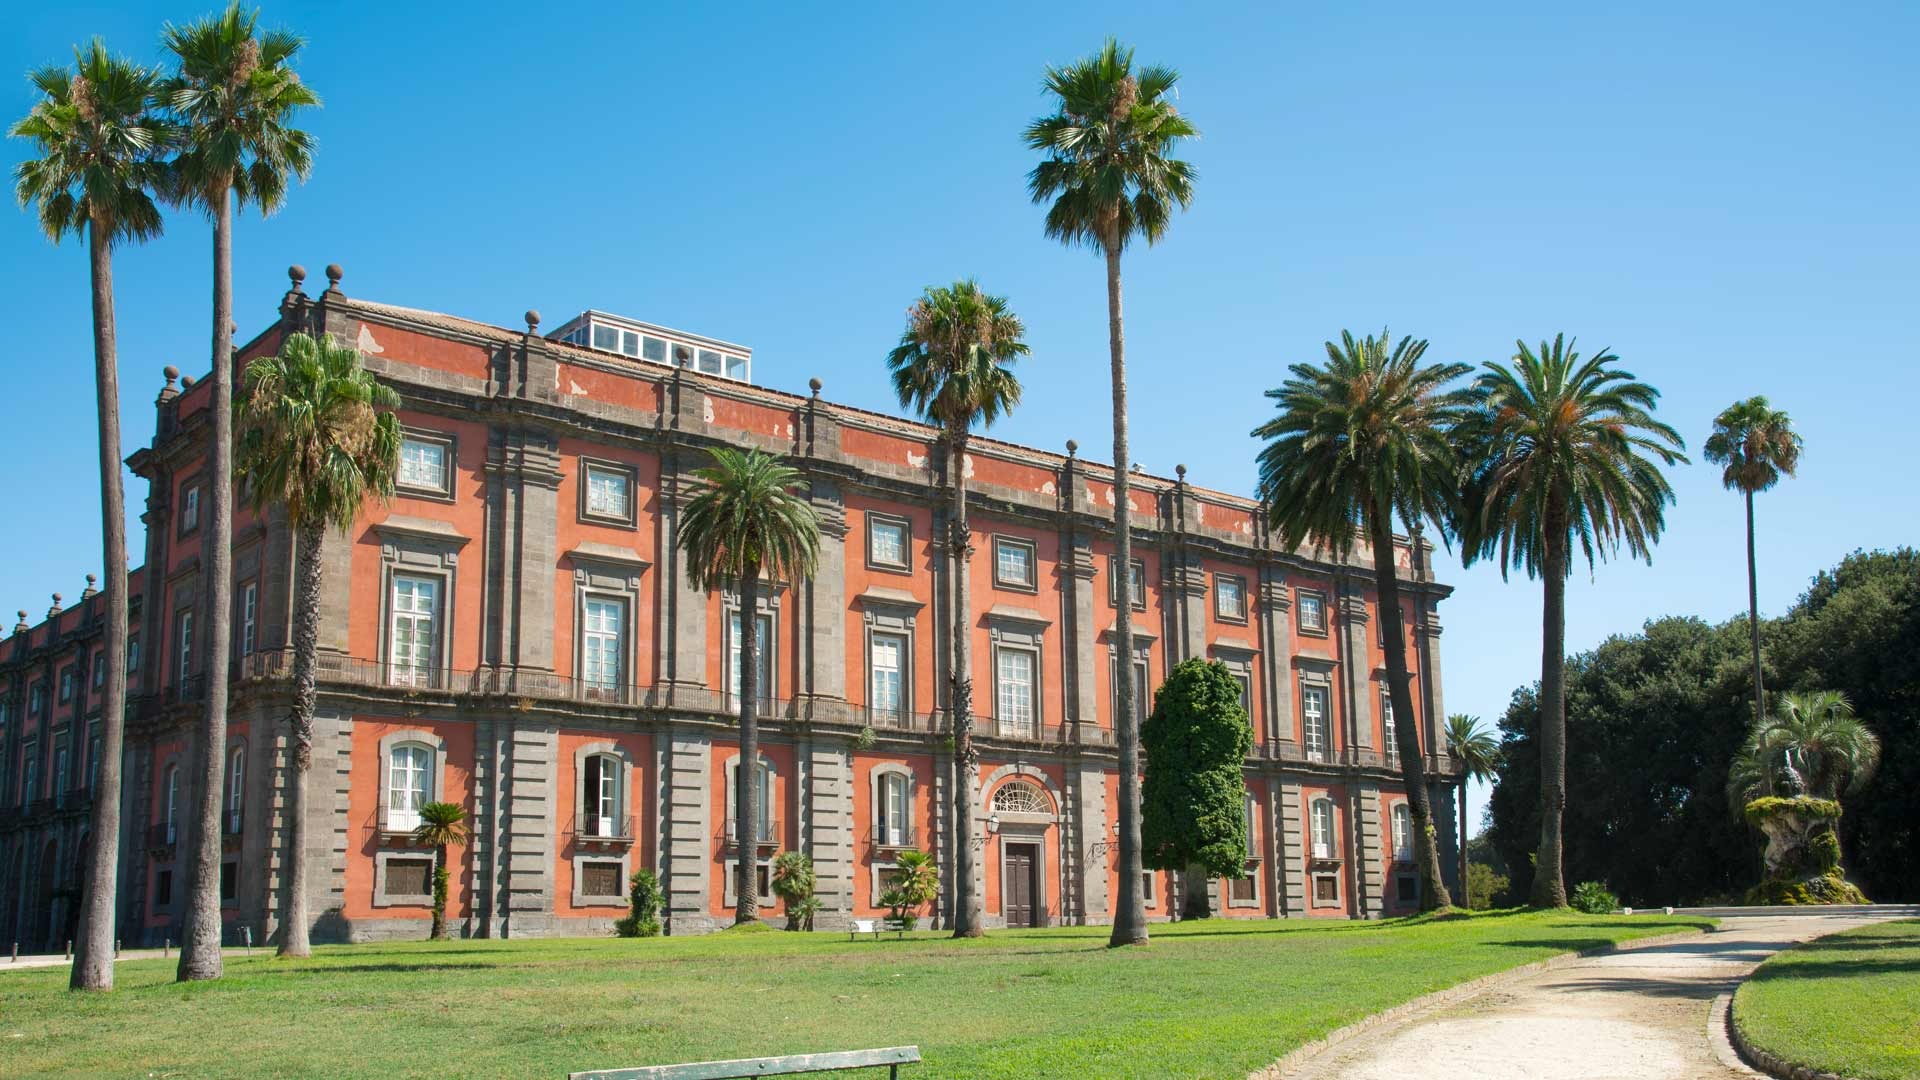 The art of the National Museum of Capodimonte